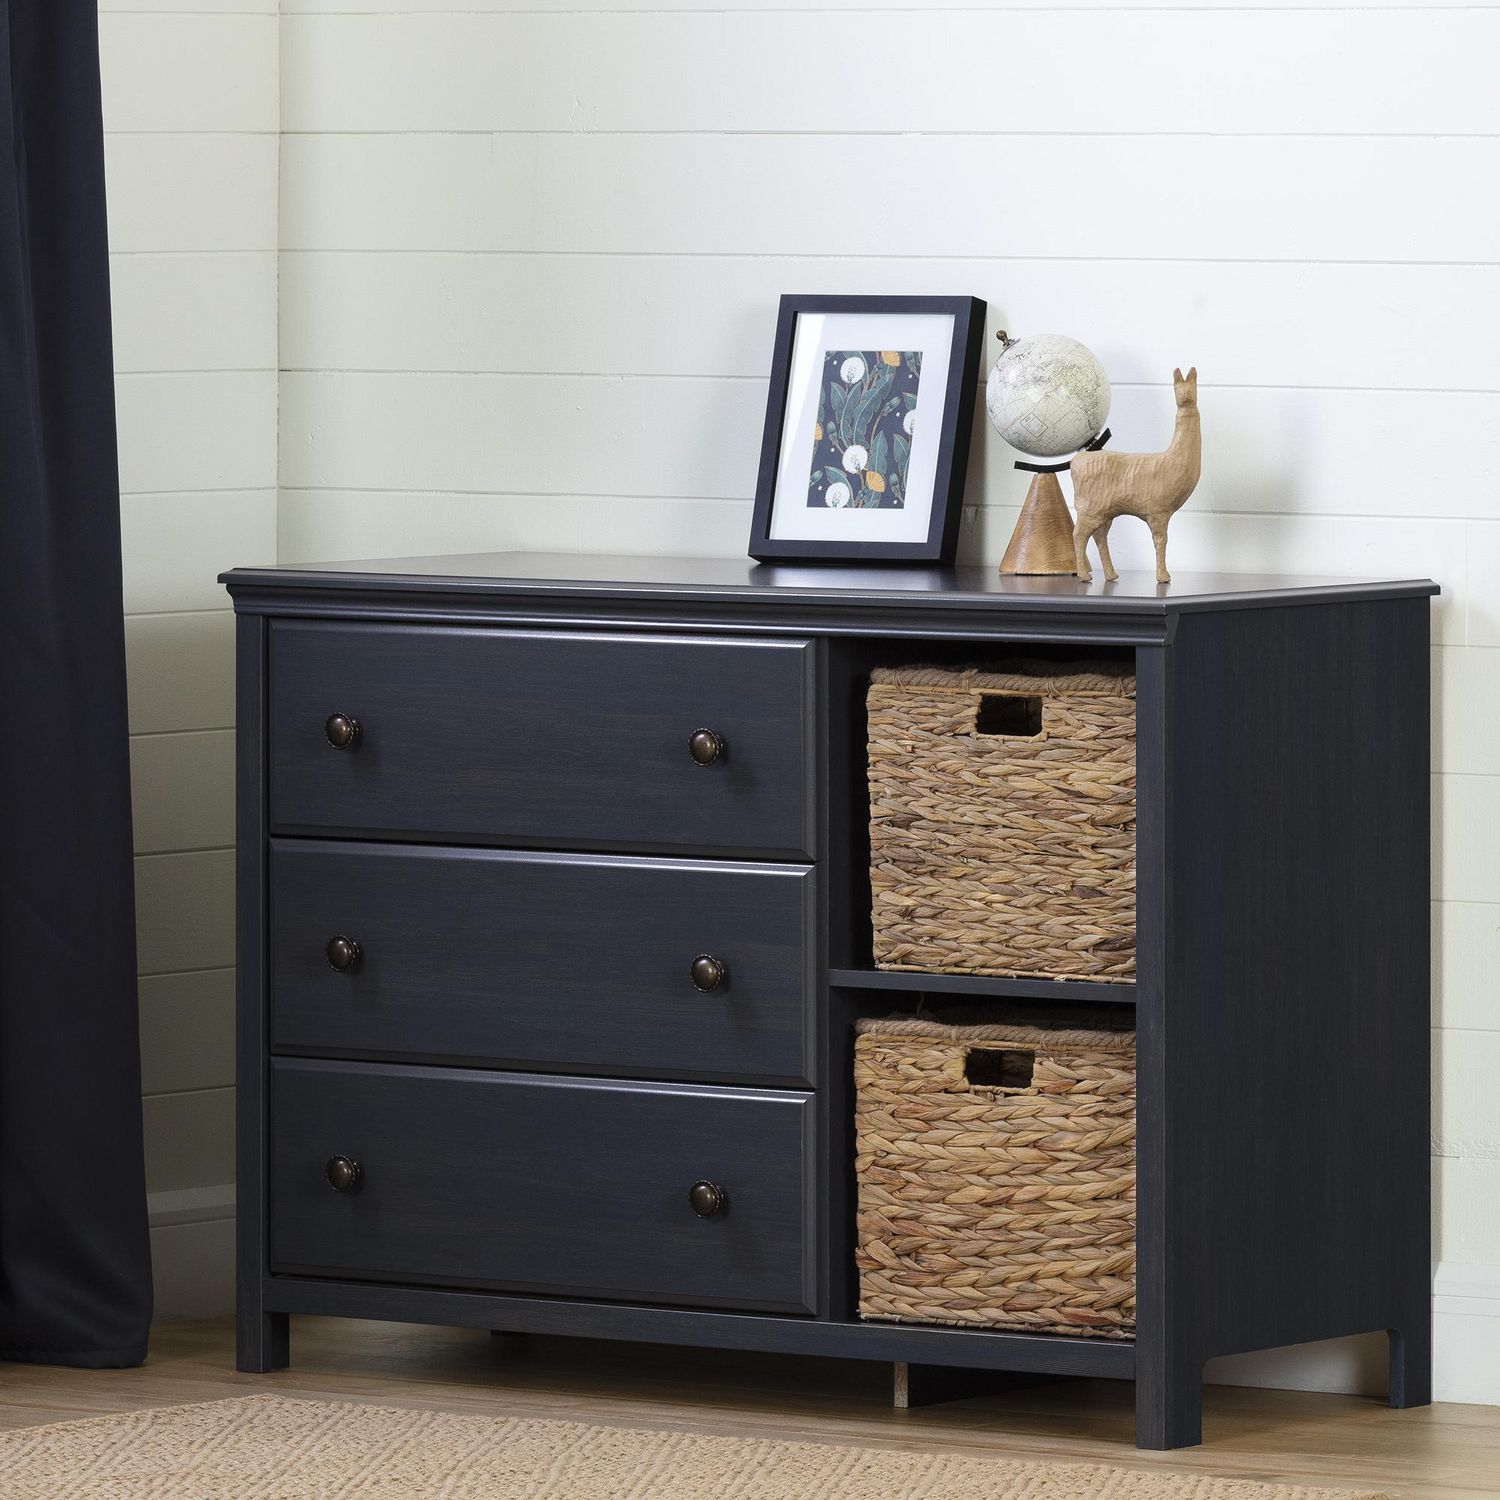 South Shore Cotton Candy 3 Drawer Dresser With Baskets Walmart